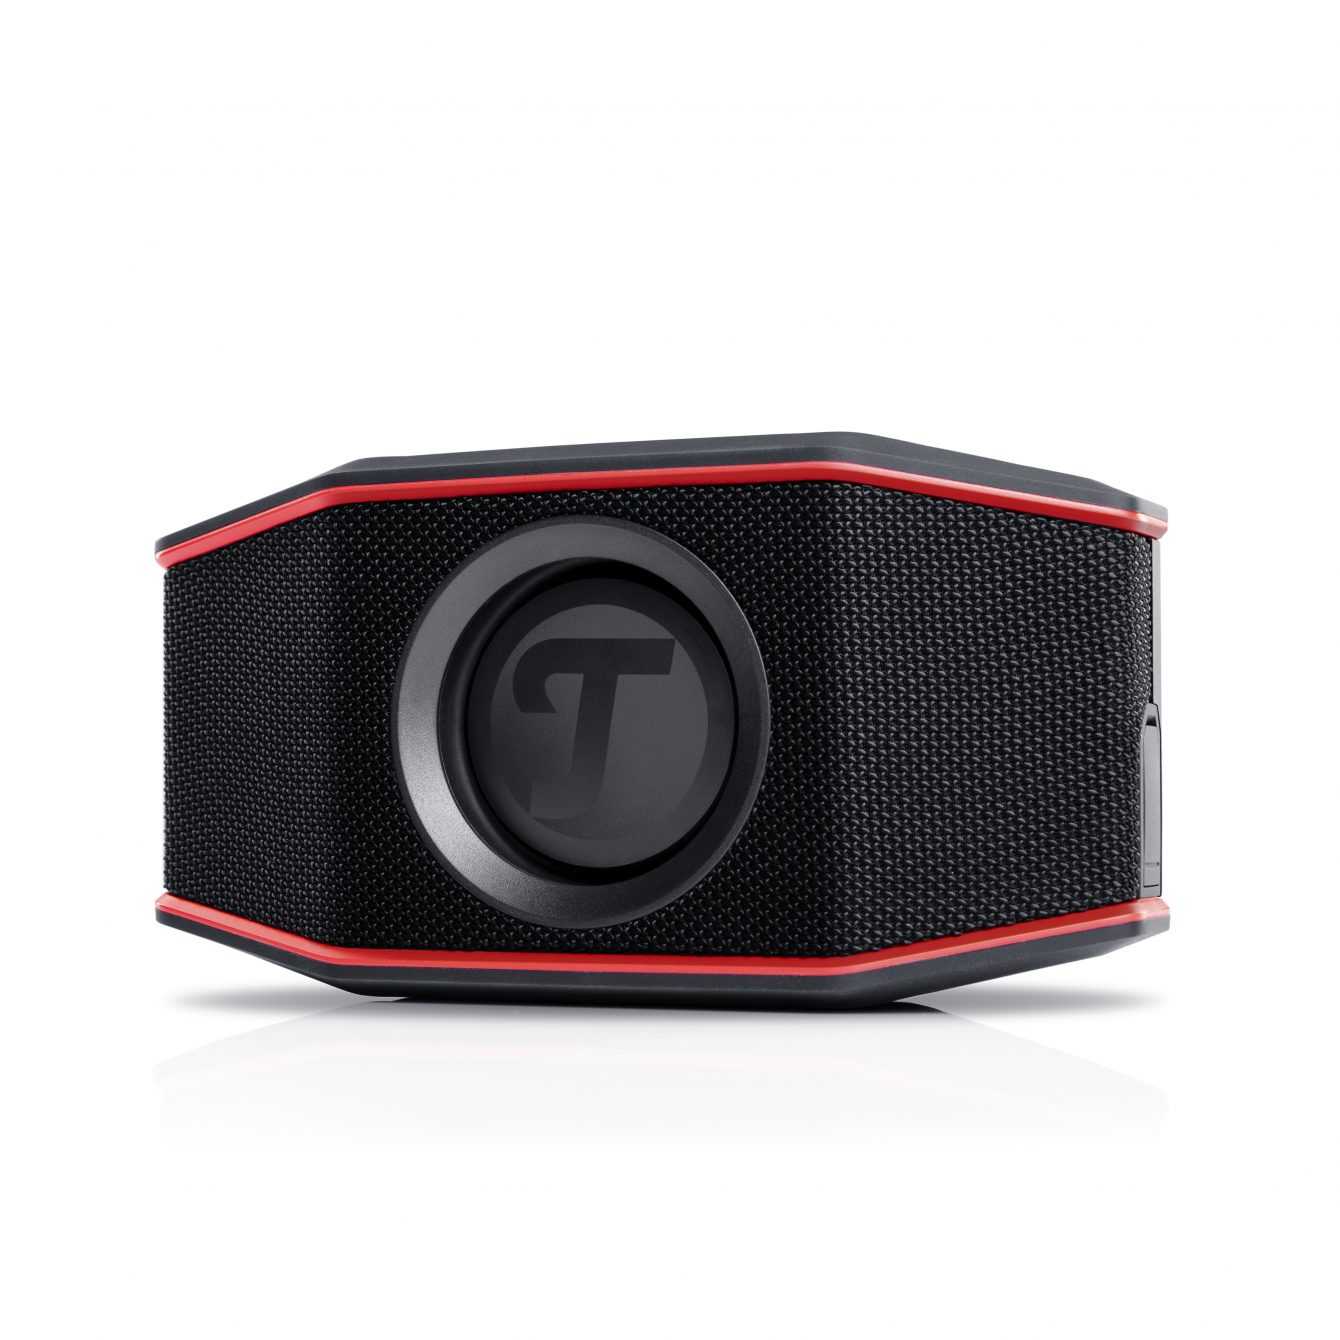 Teufel: special offer products for Father's Day